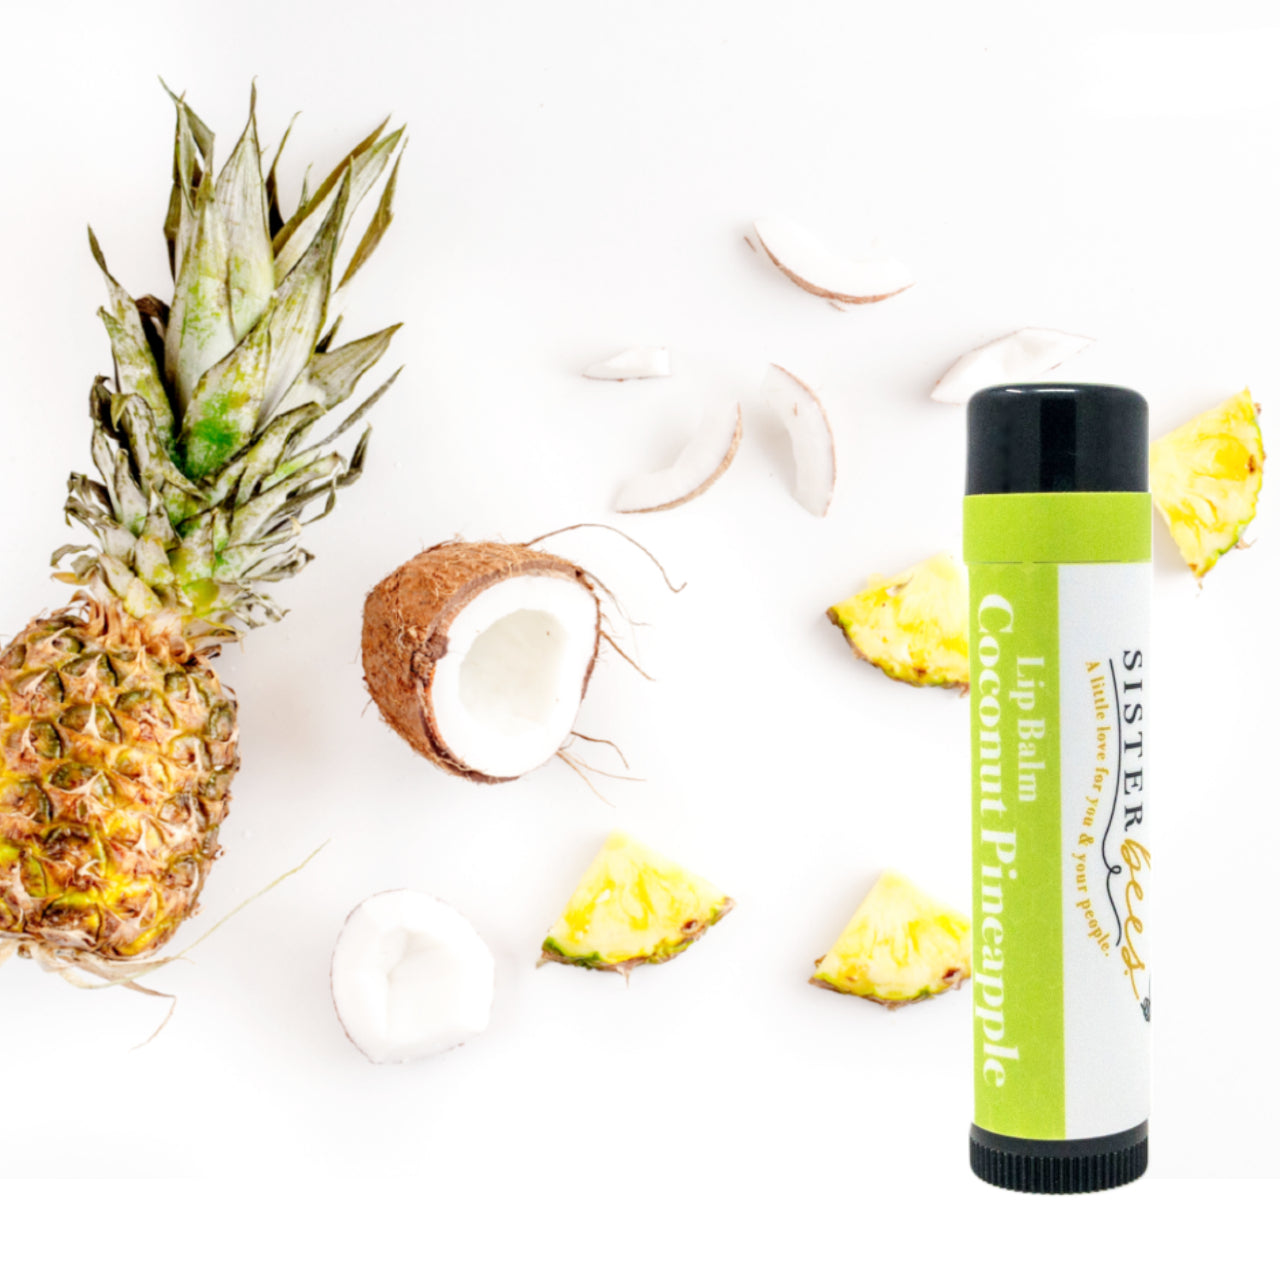 Coconut Pineapple All Natural Beeswax Lip Balm.